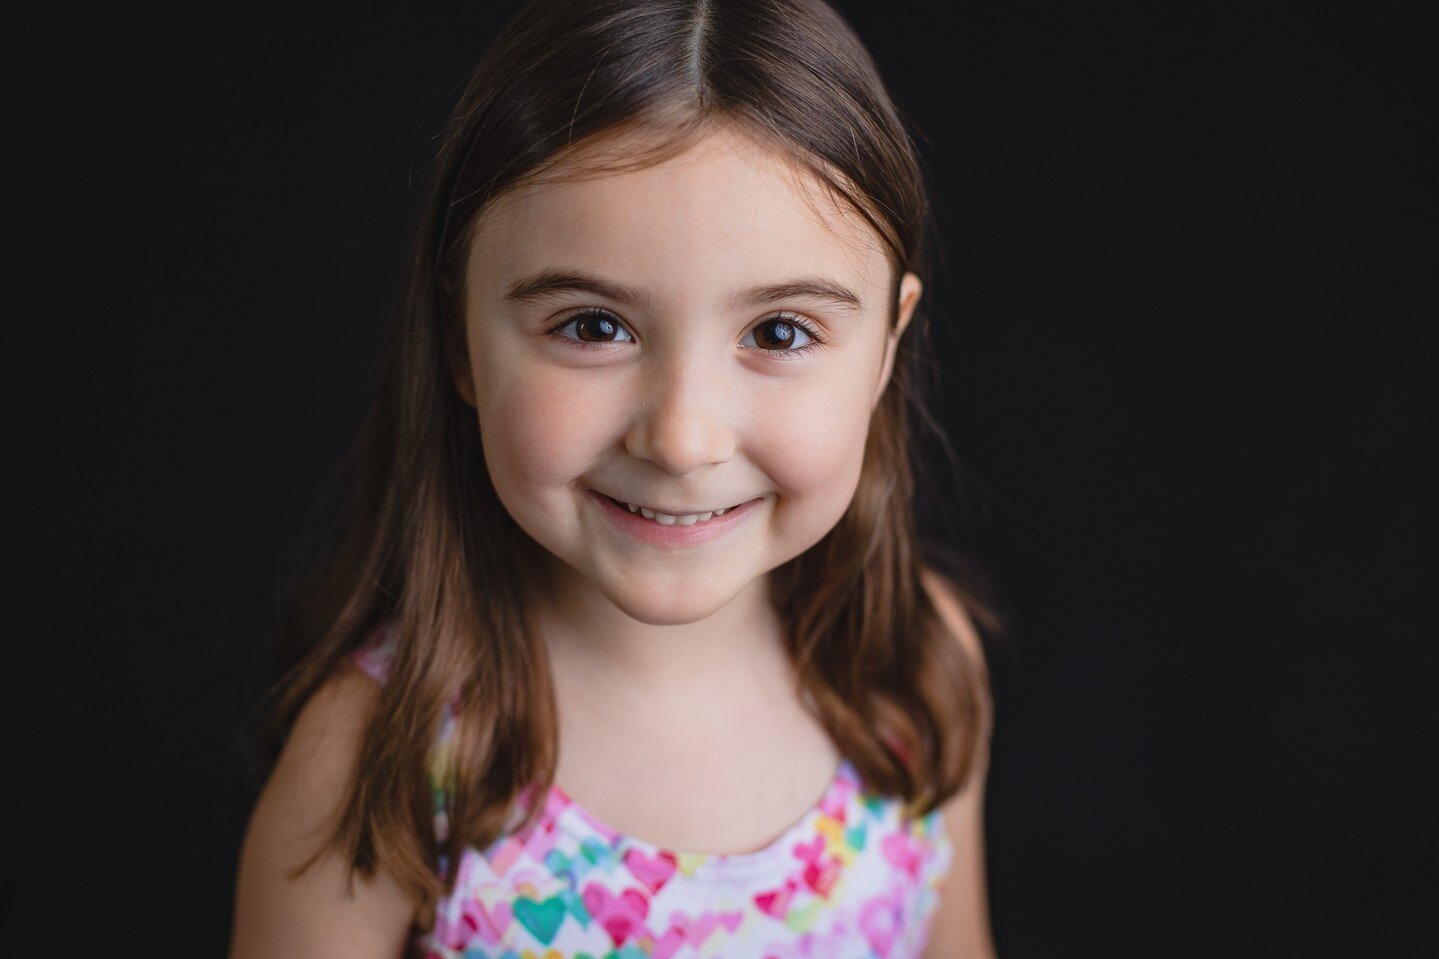 Check your email!⁠
⁠
Better Than School Portraits go live for booking to newsletter subscribers today at 10AM.